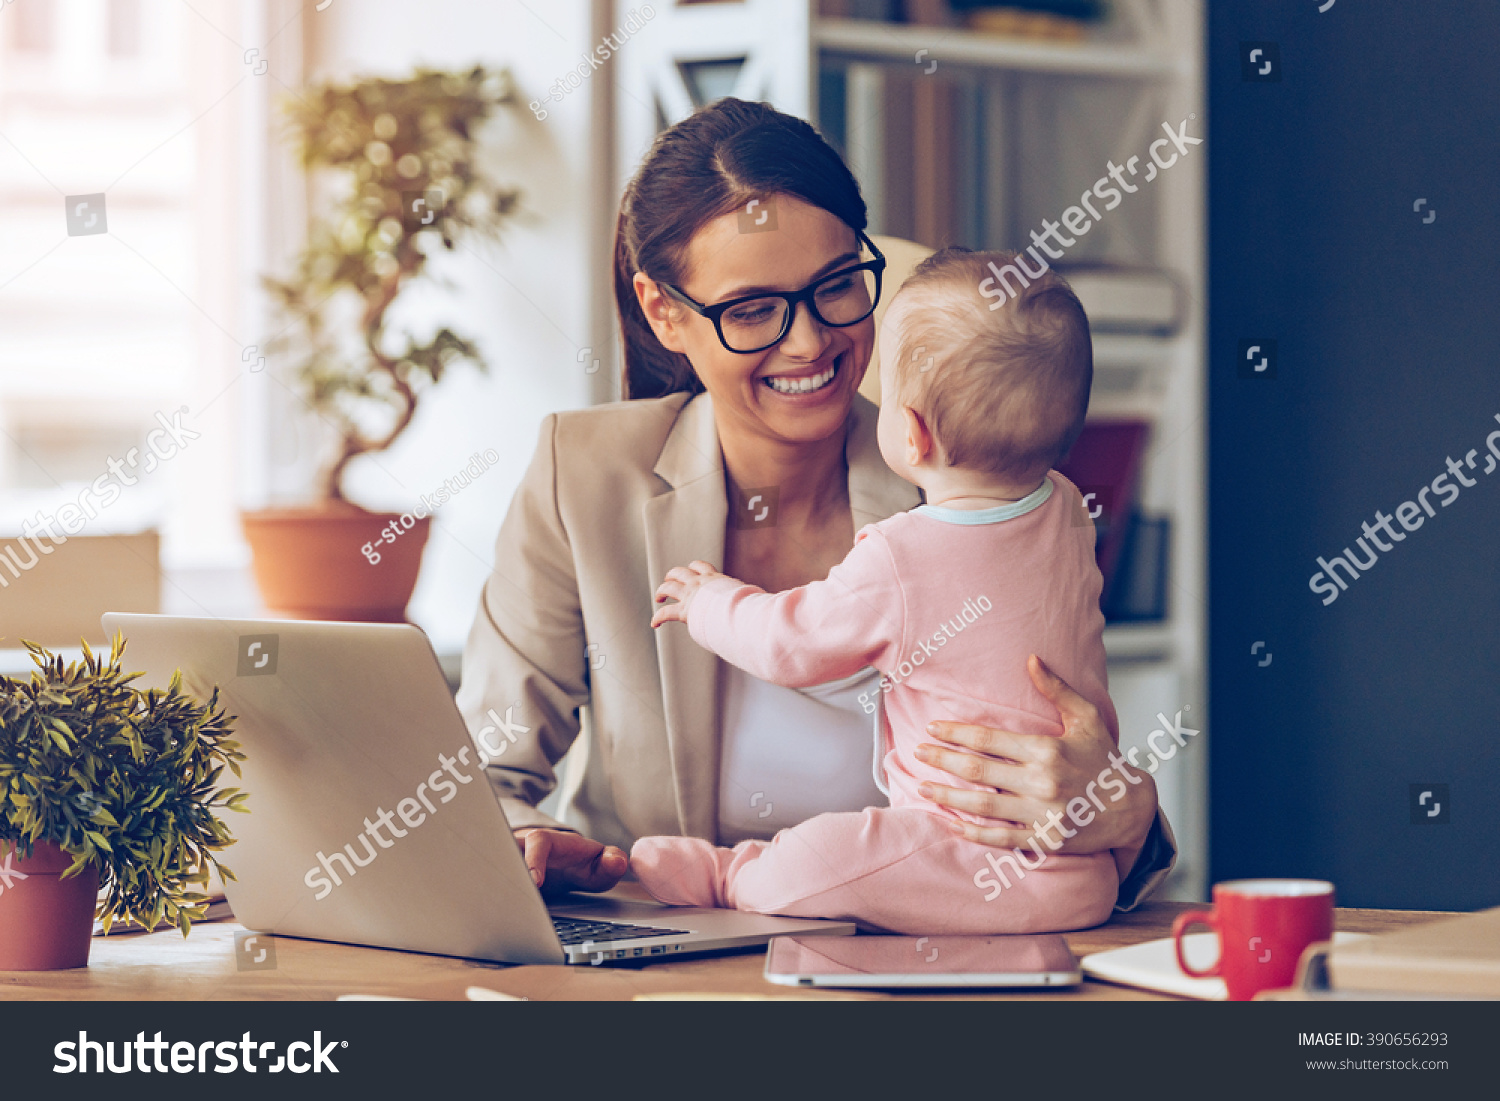 Working together is so fun! Cheerful young beautiful businesswoman looking at her baby girl with smile while sitting at her working place #390656293